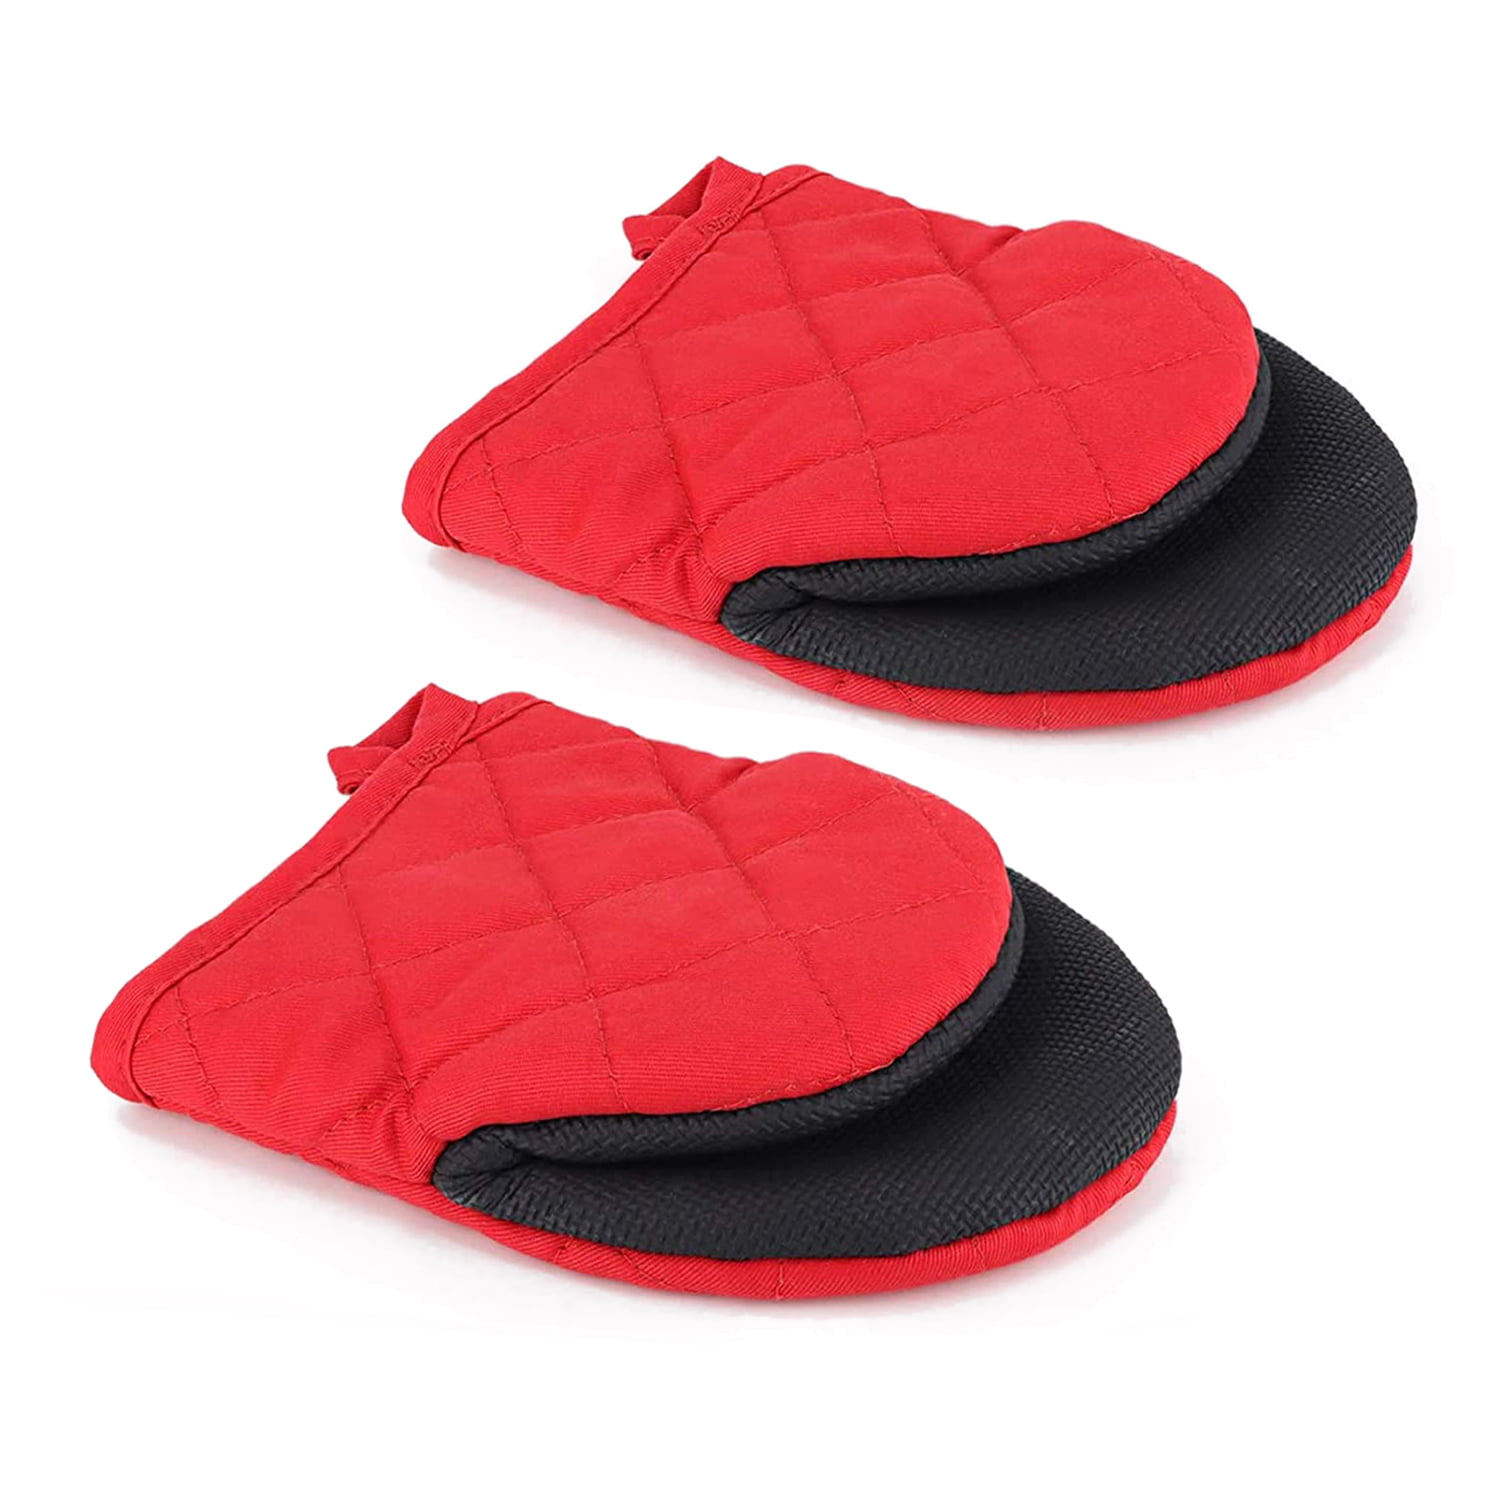 2pcs, Polyester Oven Mitts, Short Heat Resistant Mitts, Microwave